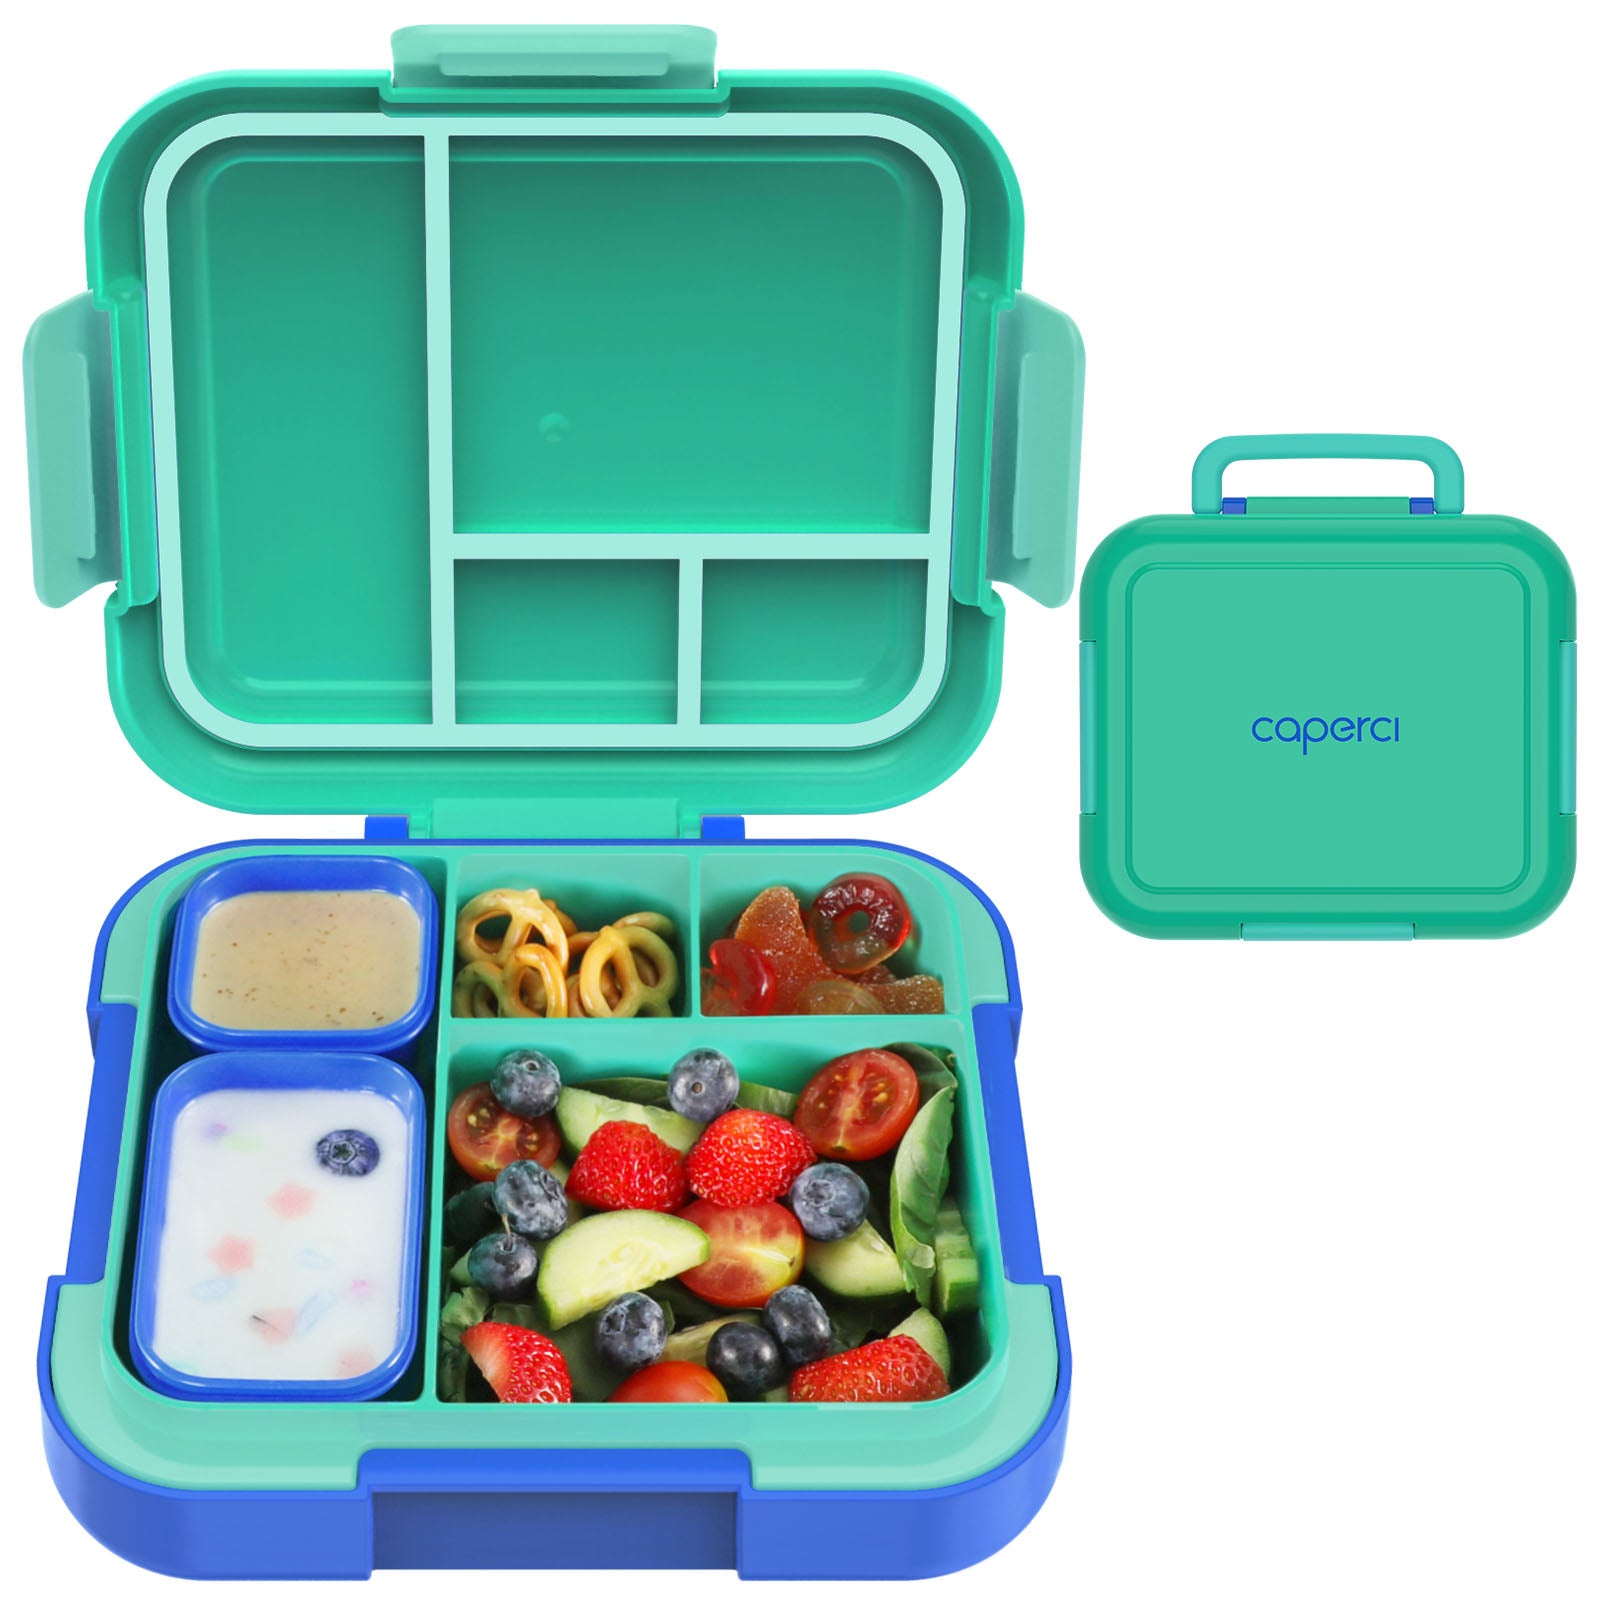 Caperci Kids Bento Lunch Box with Insulated Thermos - Leakproof Versatile  Lunch Box Food Containers for Kids & Teens, 4 Compartments, Two Temperature